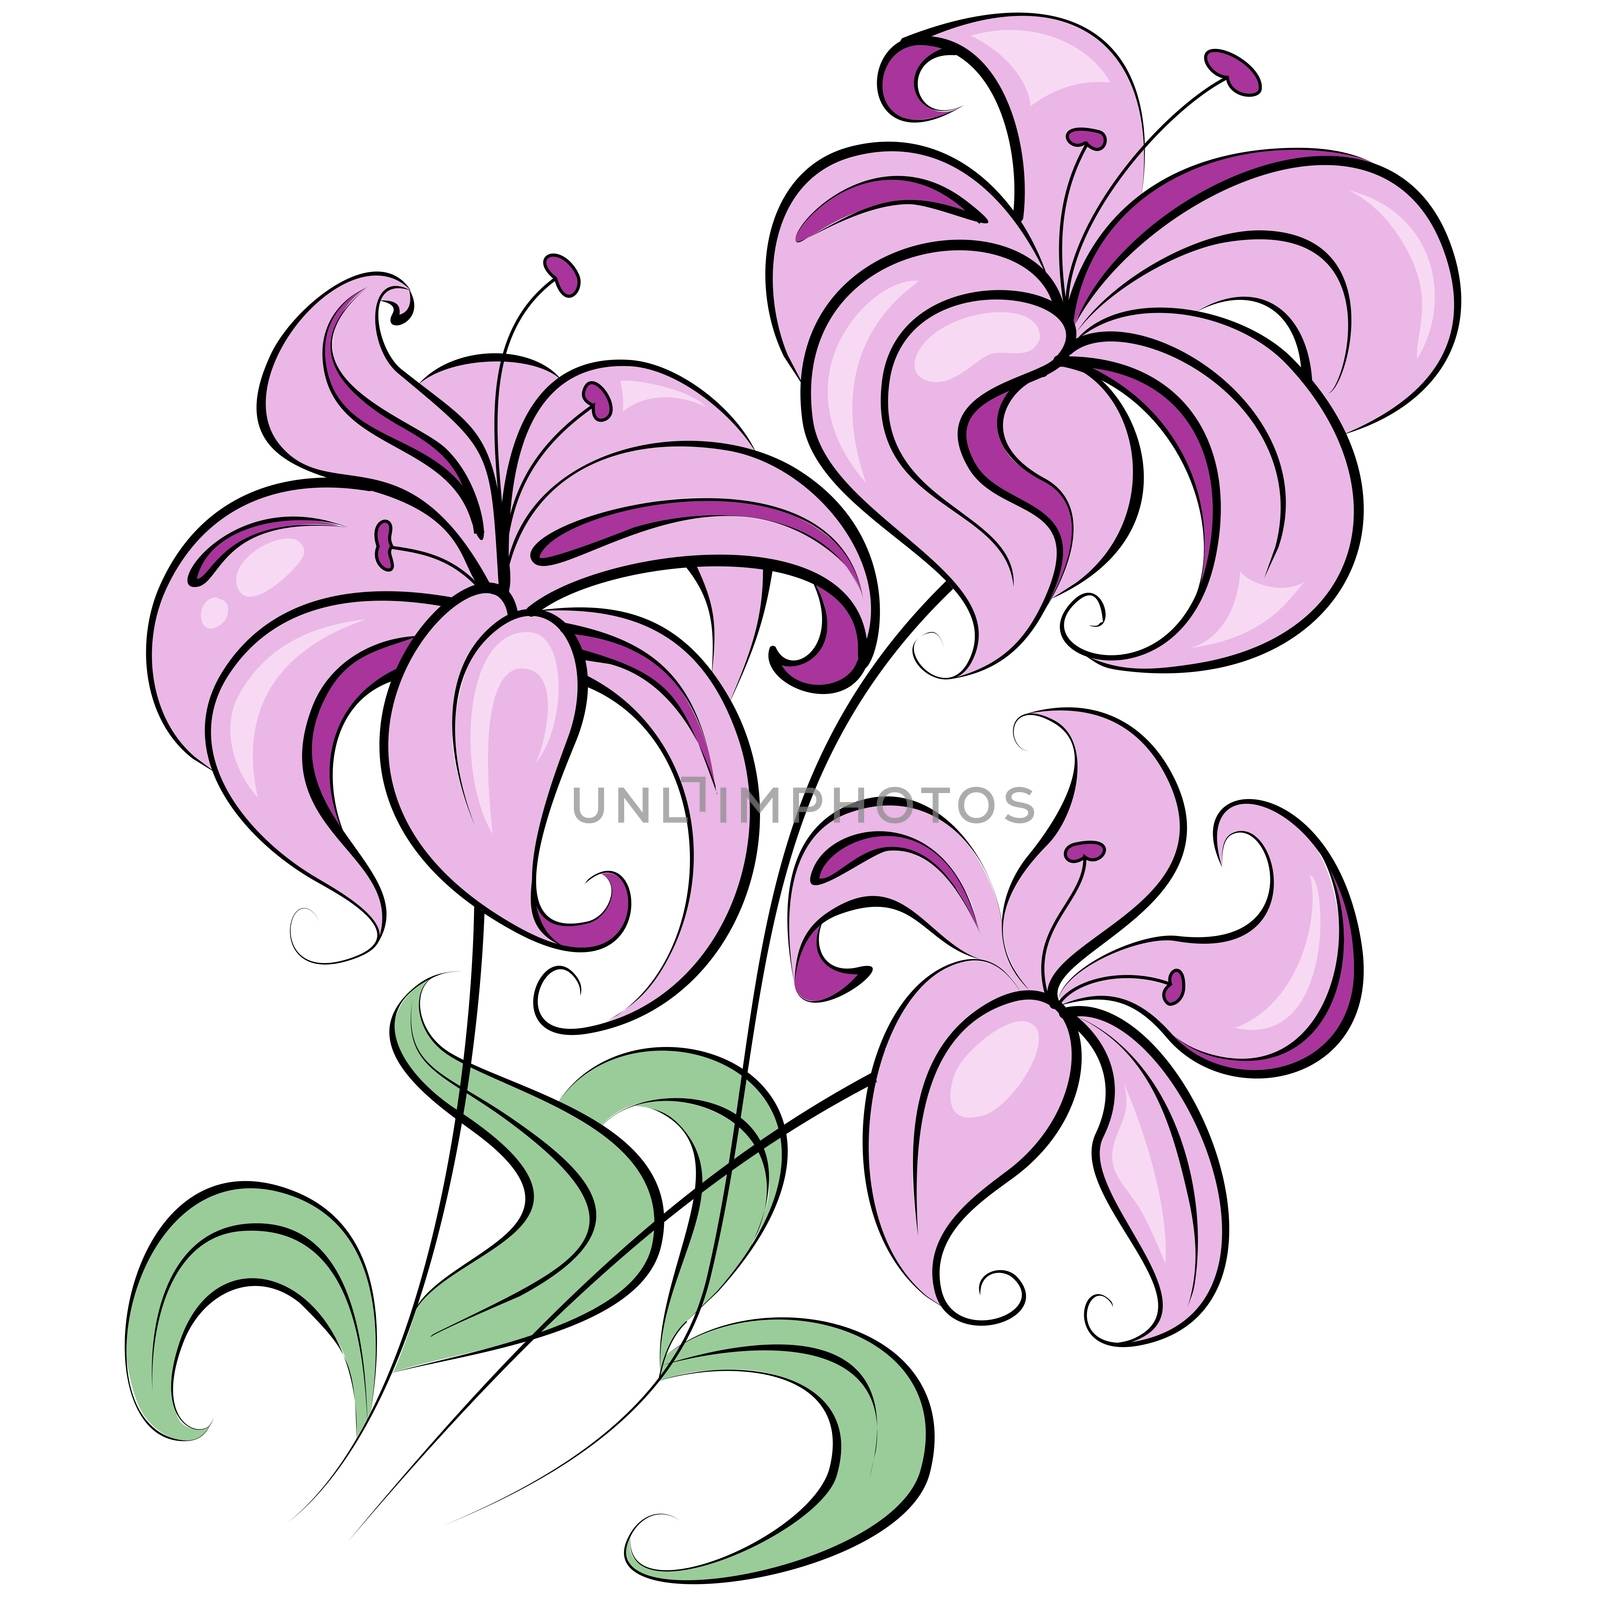 Illustration - stylized bouquet of flowers similar to lily by Madhourse